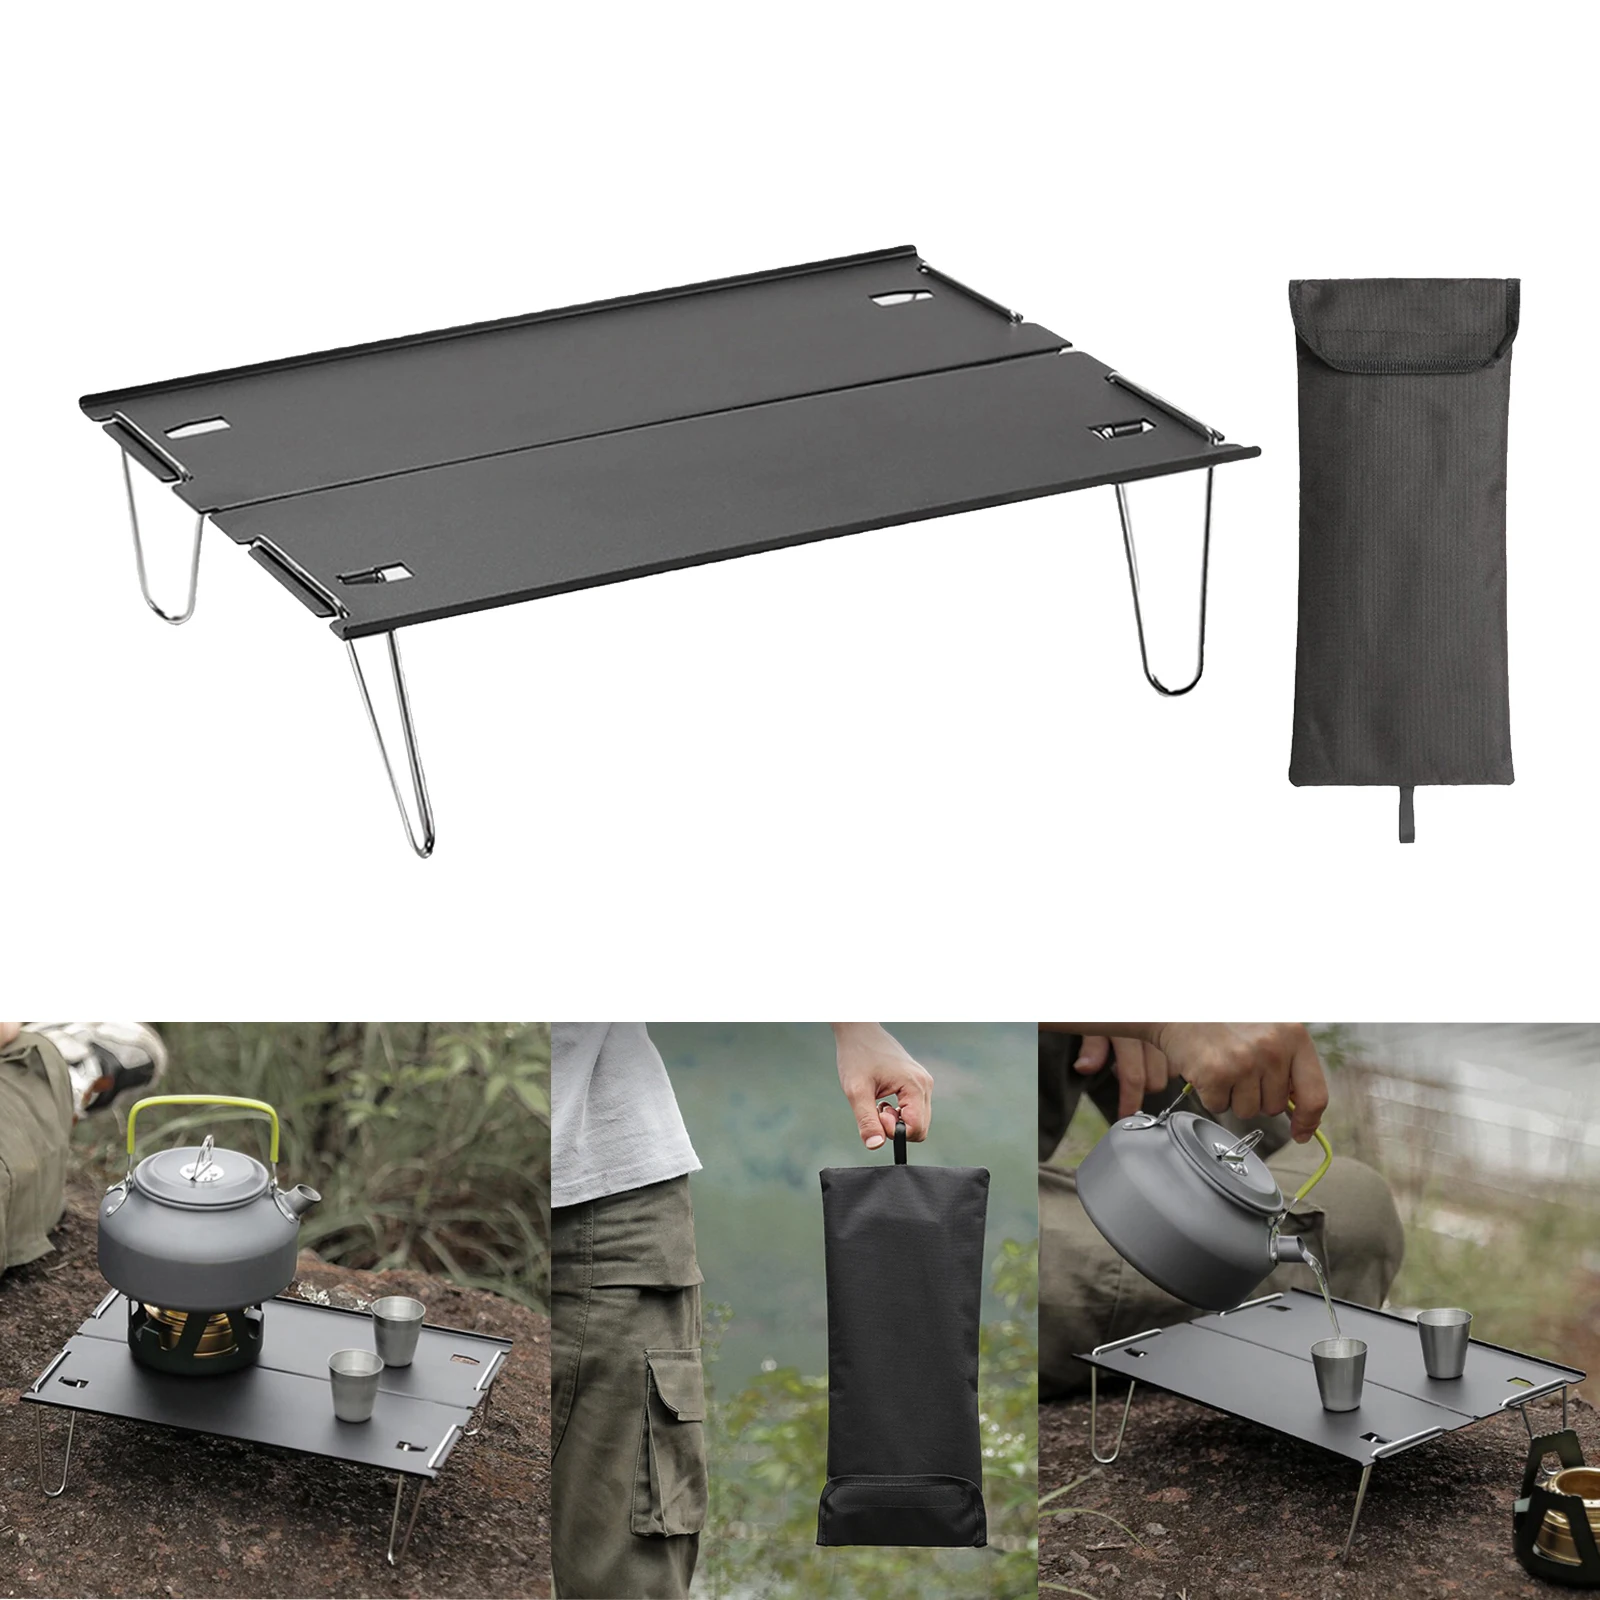 Mini Outdoor Folding Table Portable Ultra-light Aluminum Alloy Collapsible Backpacking Hiking BBQ Garden Camping Fishing Desk